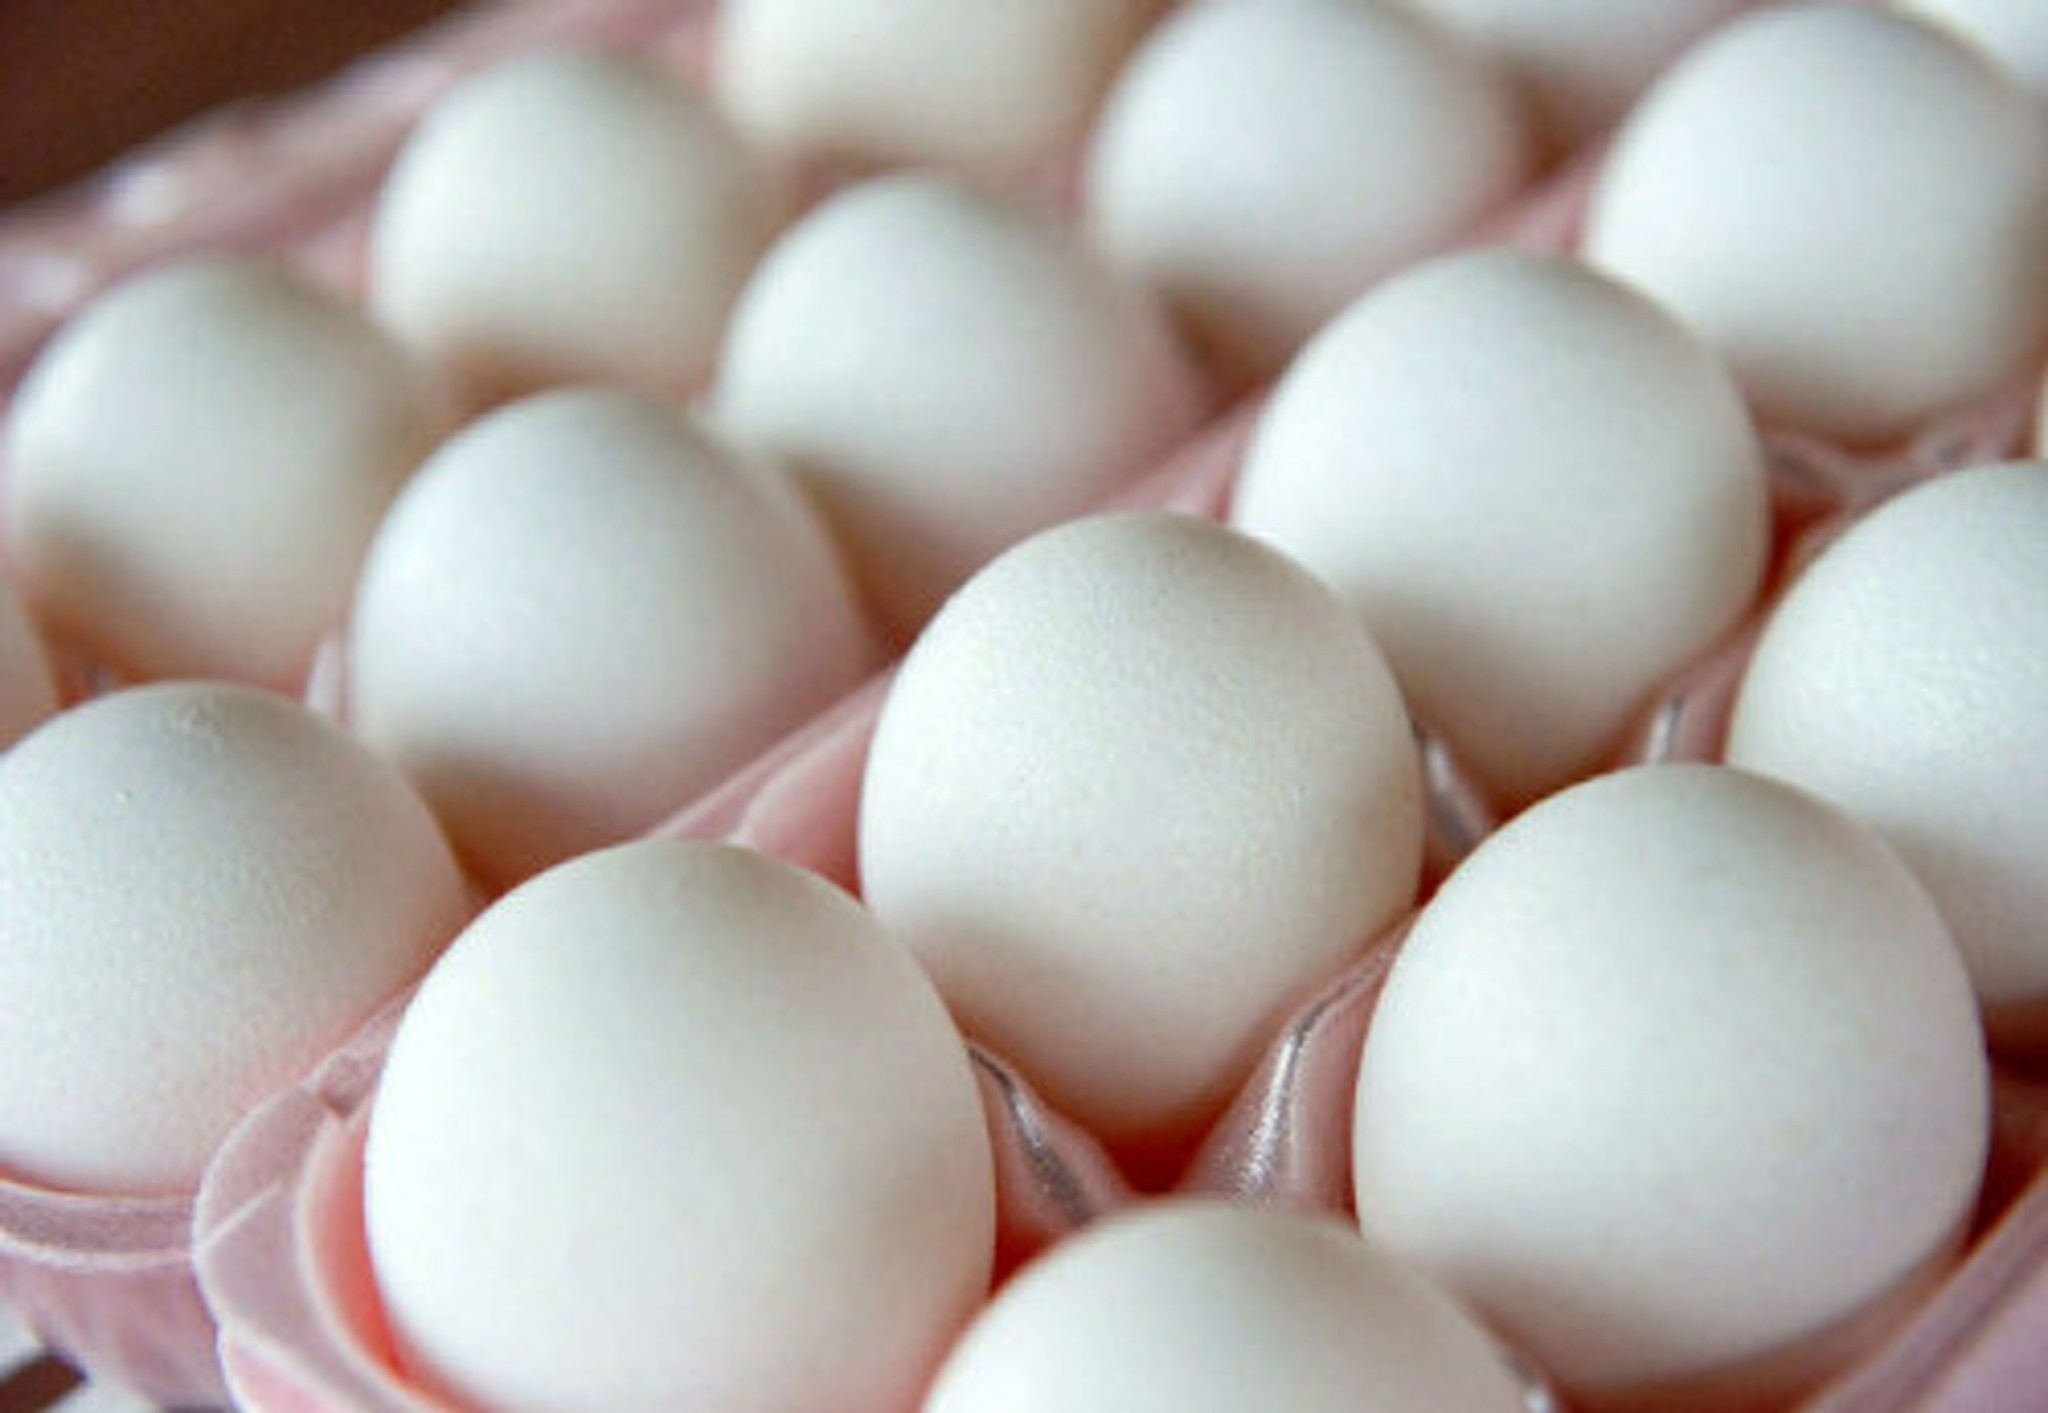 How long after the expiration date can you eat eggs?